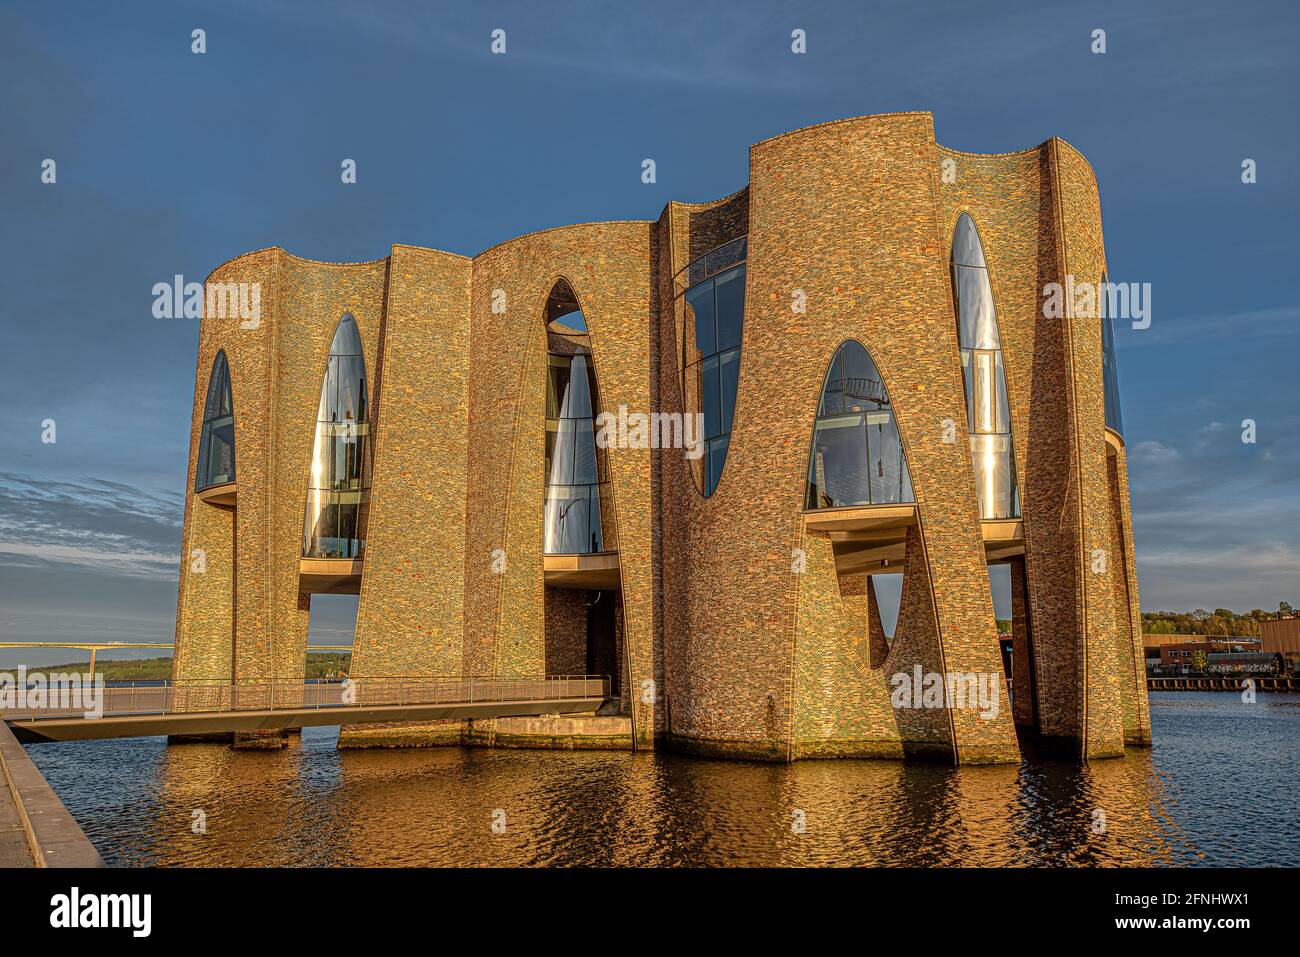 Sunshine in the late afternoon on the iconic building Frordenhus Vejle, Denmark, May 10, 2021 Stock Photo